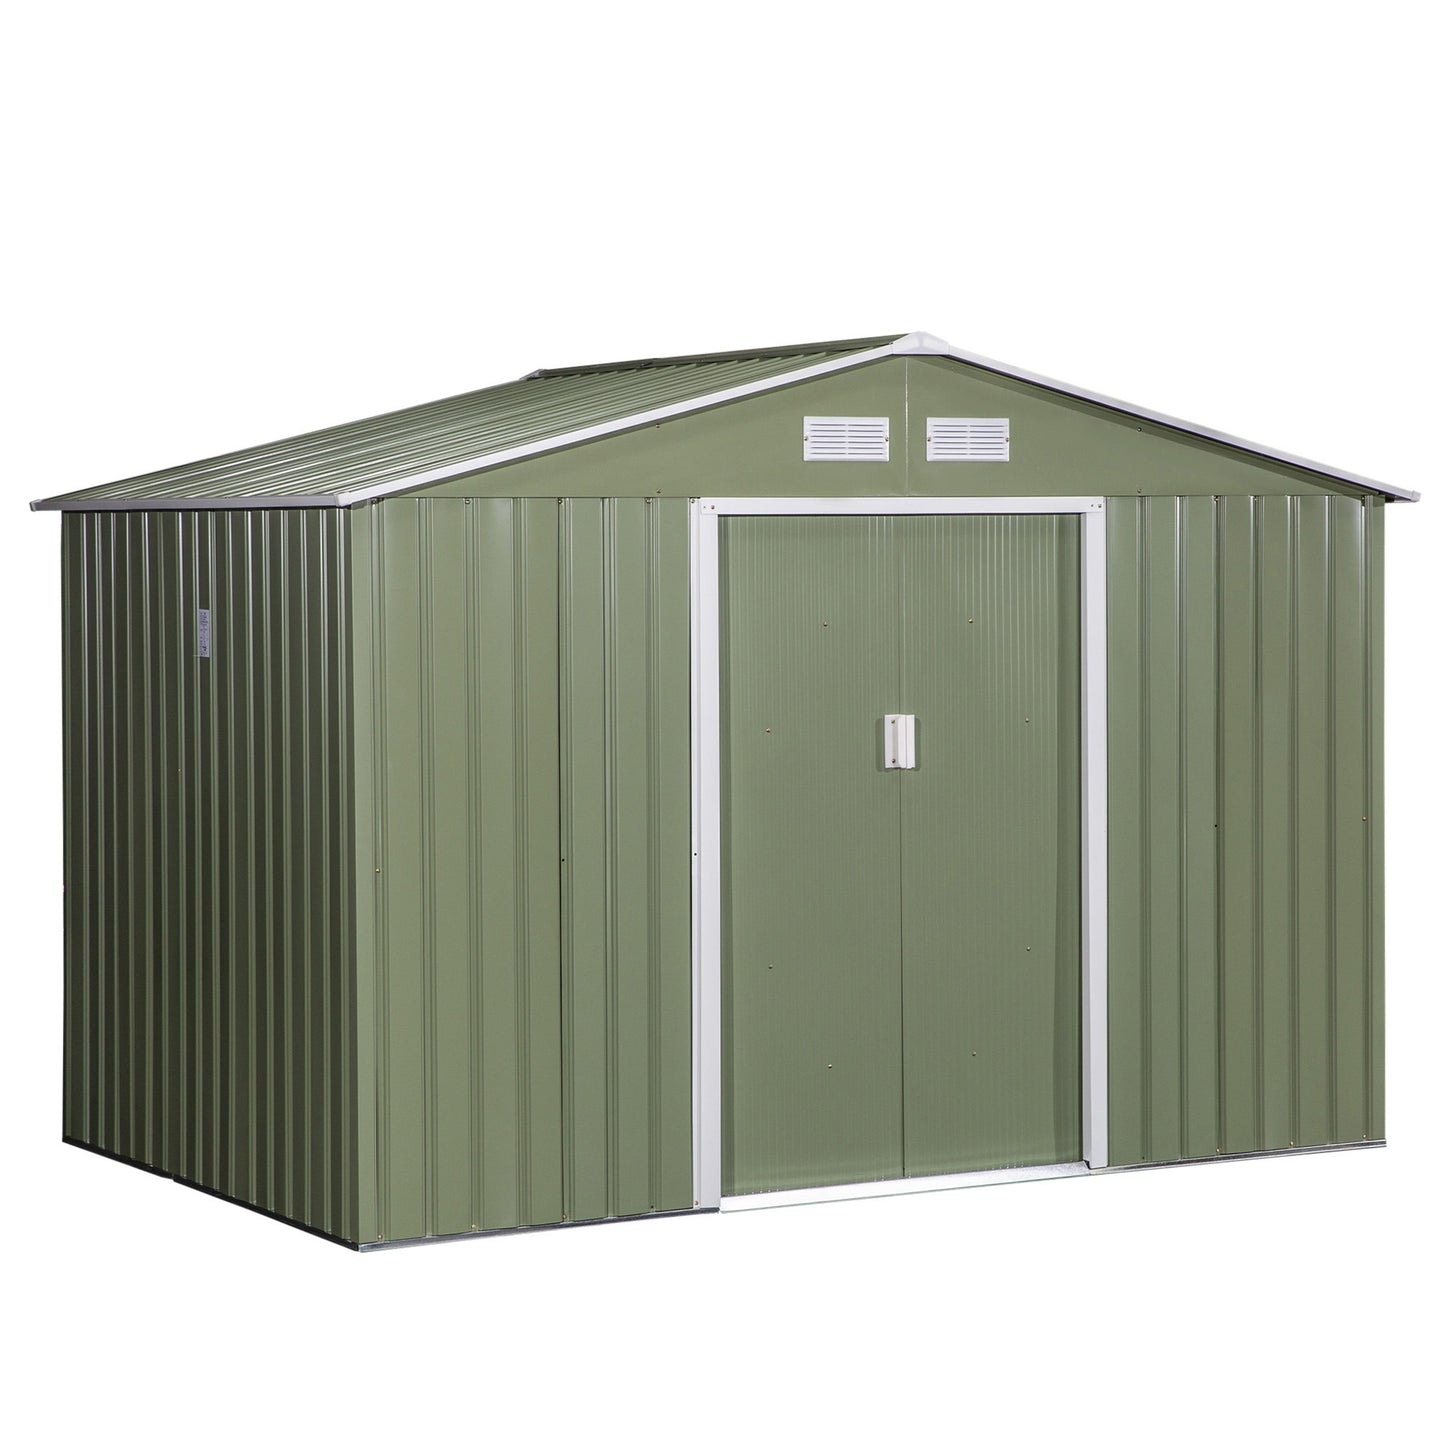 Outsunny 9 x 6 ft Metal Garden Storage Shed Corrugated Steel Roofed Tool Box with Foundation Ventilation and Doors, Light Green - OutdoorBox